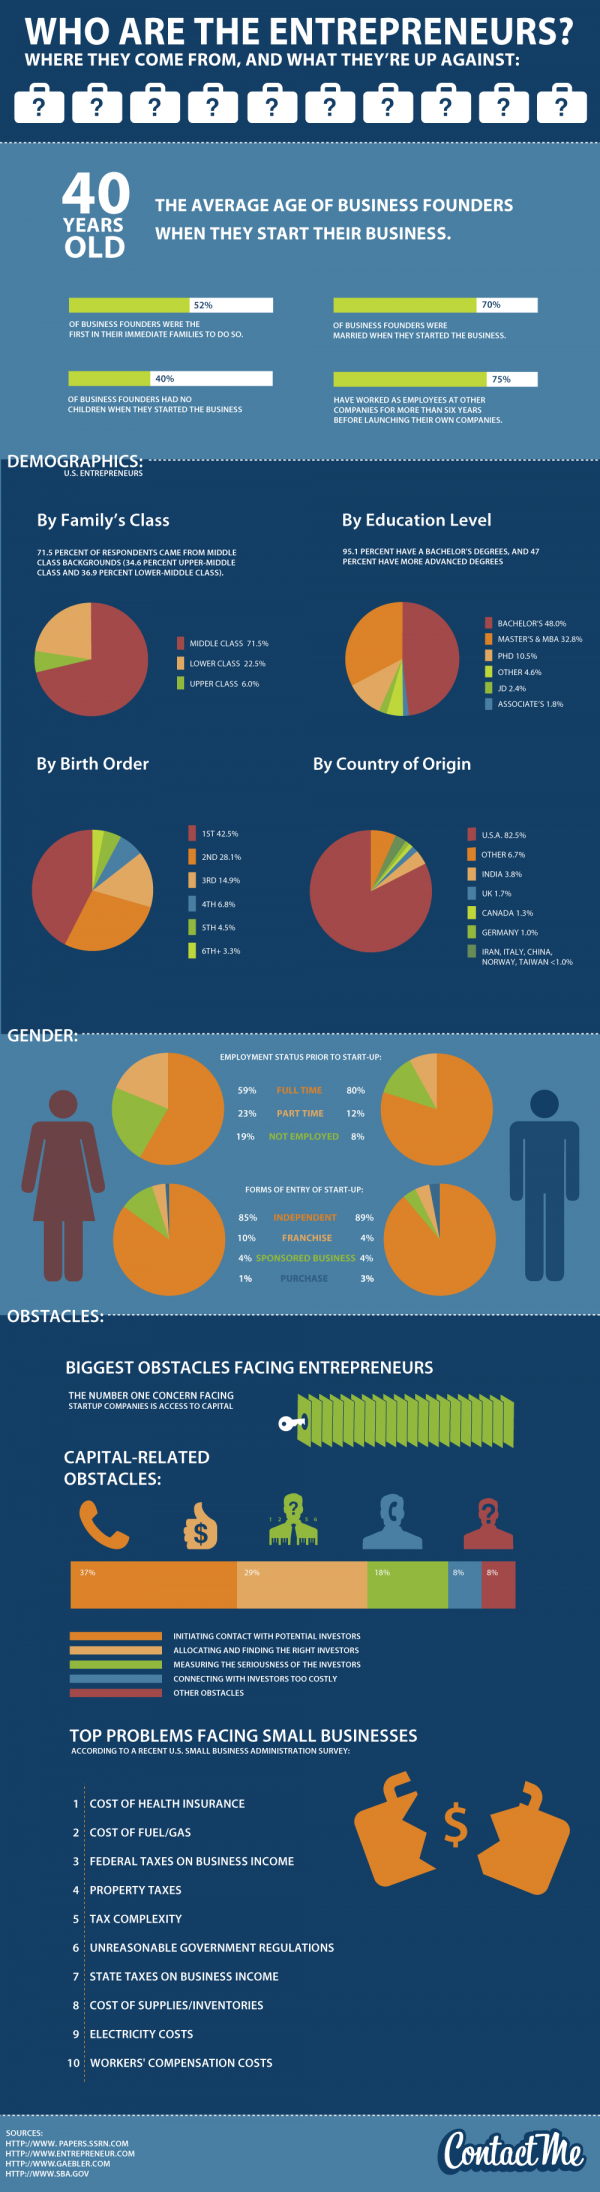 who-are-entreprenuers